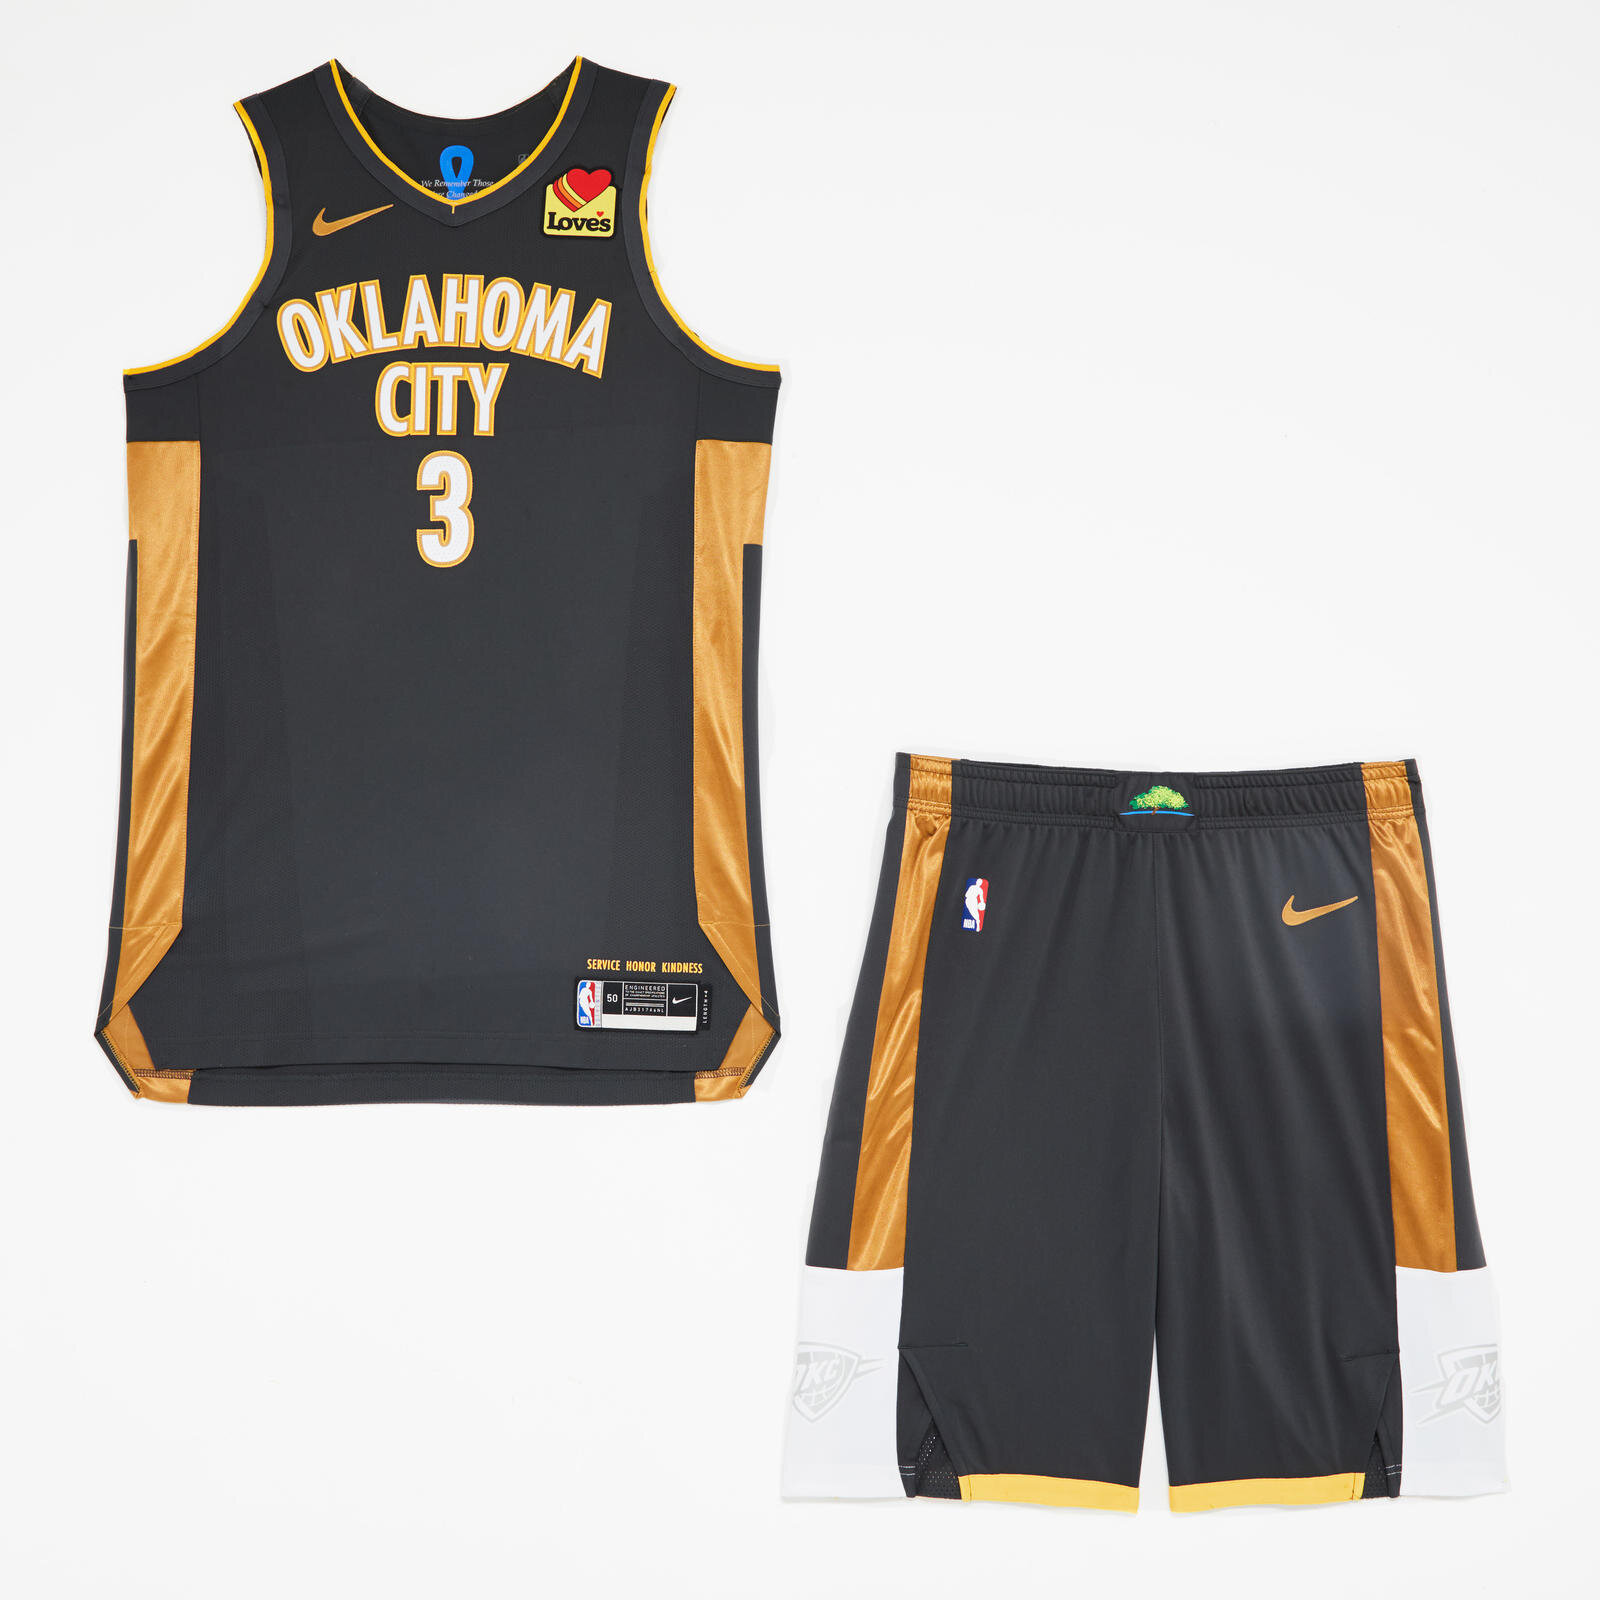 When will OKC Thunder release commemorative City Edition jersey?